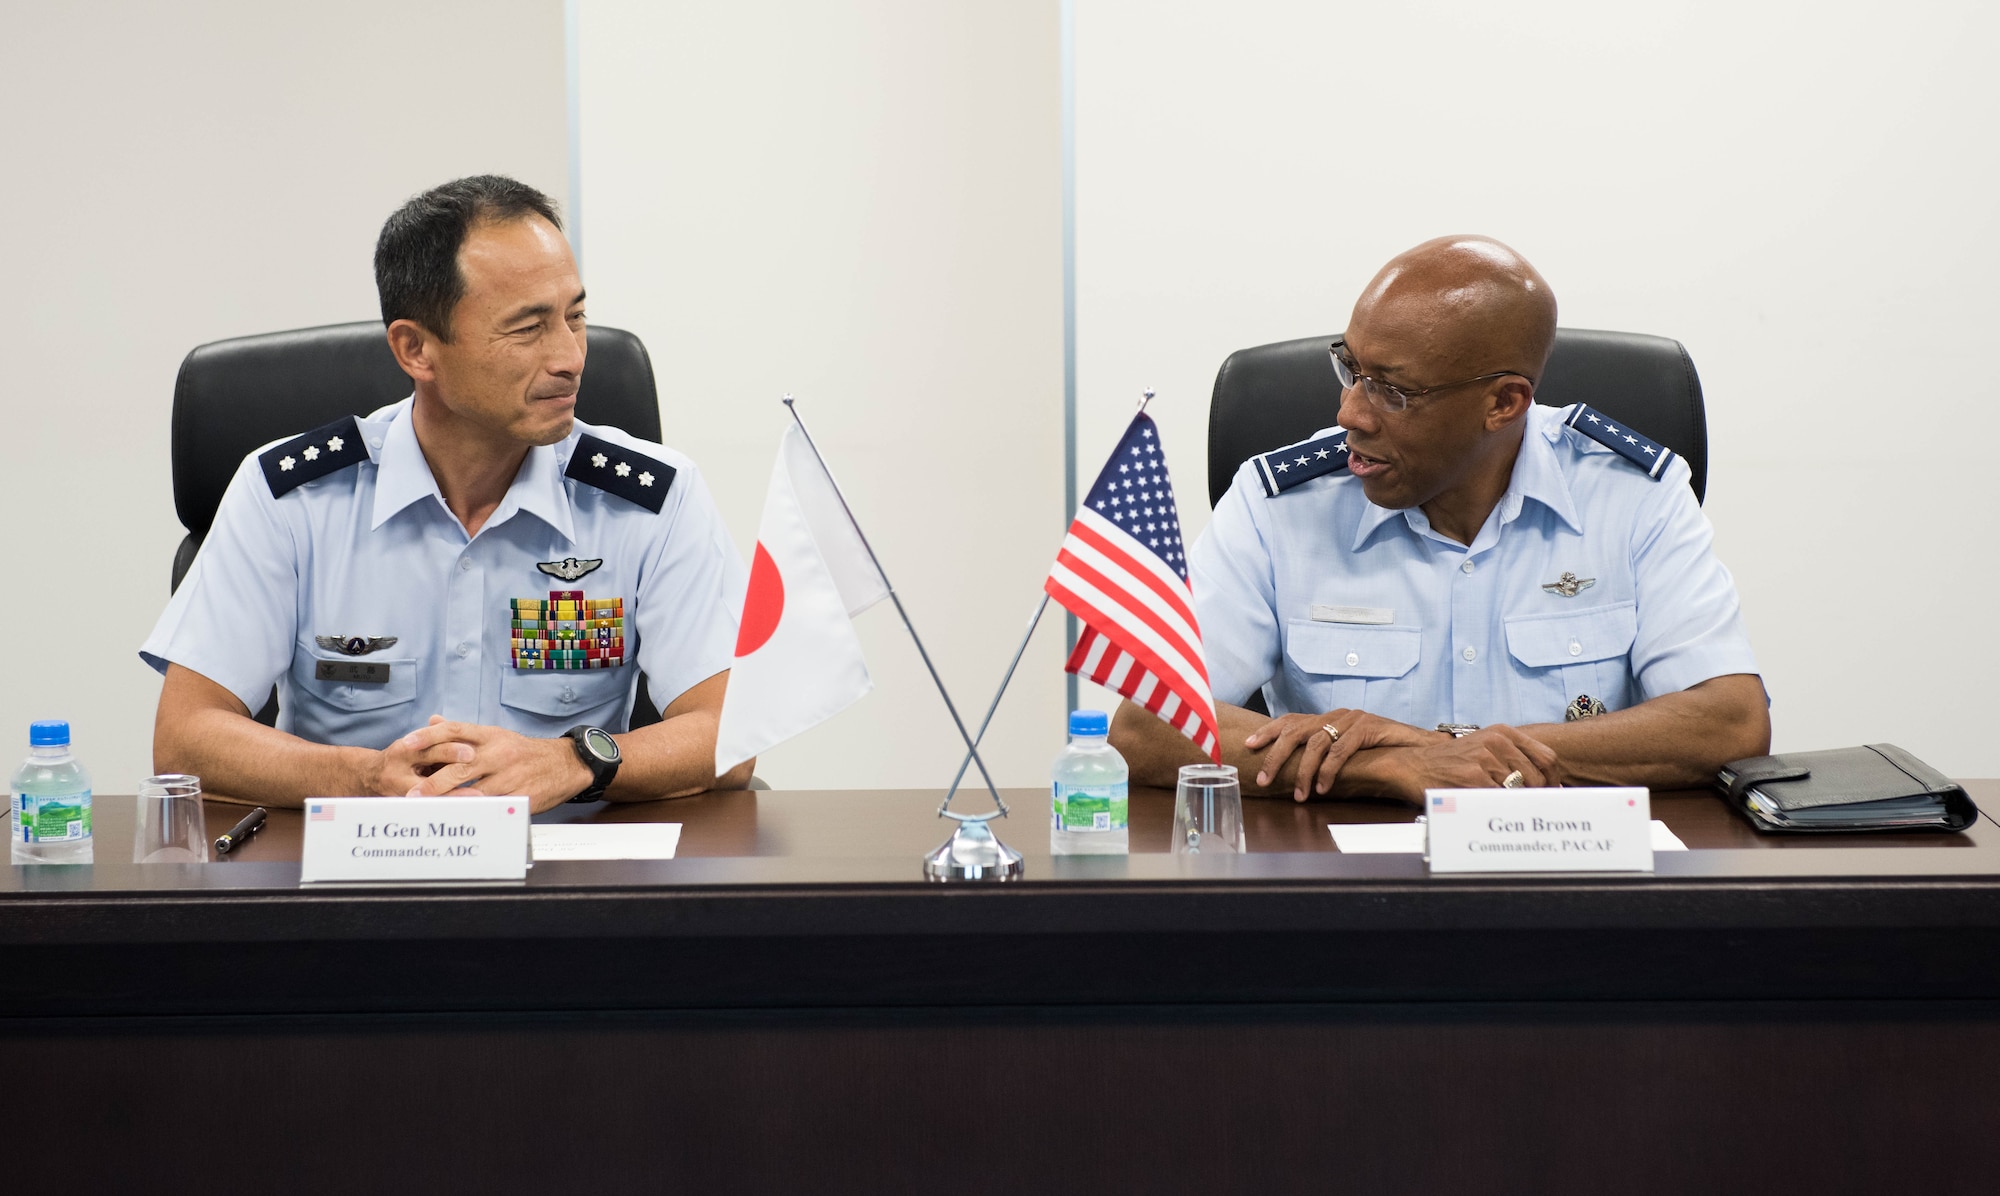 Gen. CQ Brown, Jr., Pacific Air Forces commander, and Lt. Gen. Shigeki Muto, Air Defense Command (ADC) commander, discuss opportunities to enhance cooperation and coordination during his visit to Yokota Air Base, Japan, Aug. 6, 2018. While at the ADC headquarters, the general observed a ballistic missile defense demonstration. (U.S. Air Force photo by Staff Sgt. Hailey Haux)